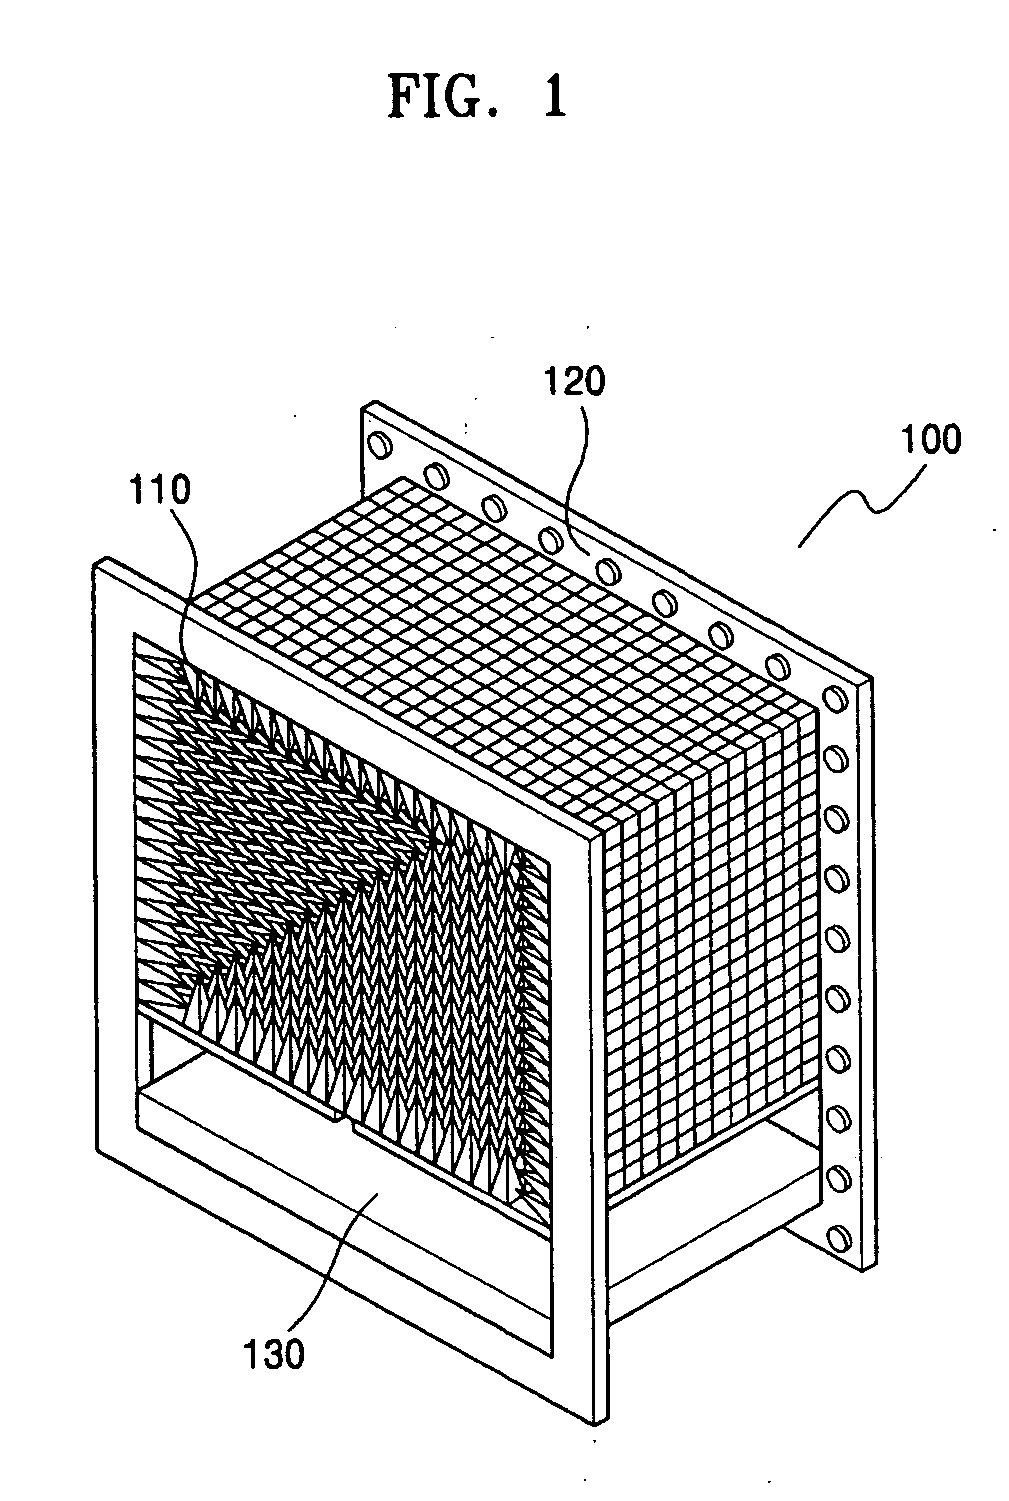 Apparatus for measuring read range between RFID tag and reader